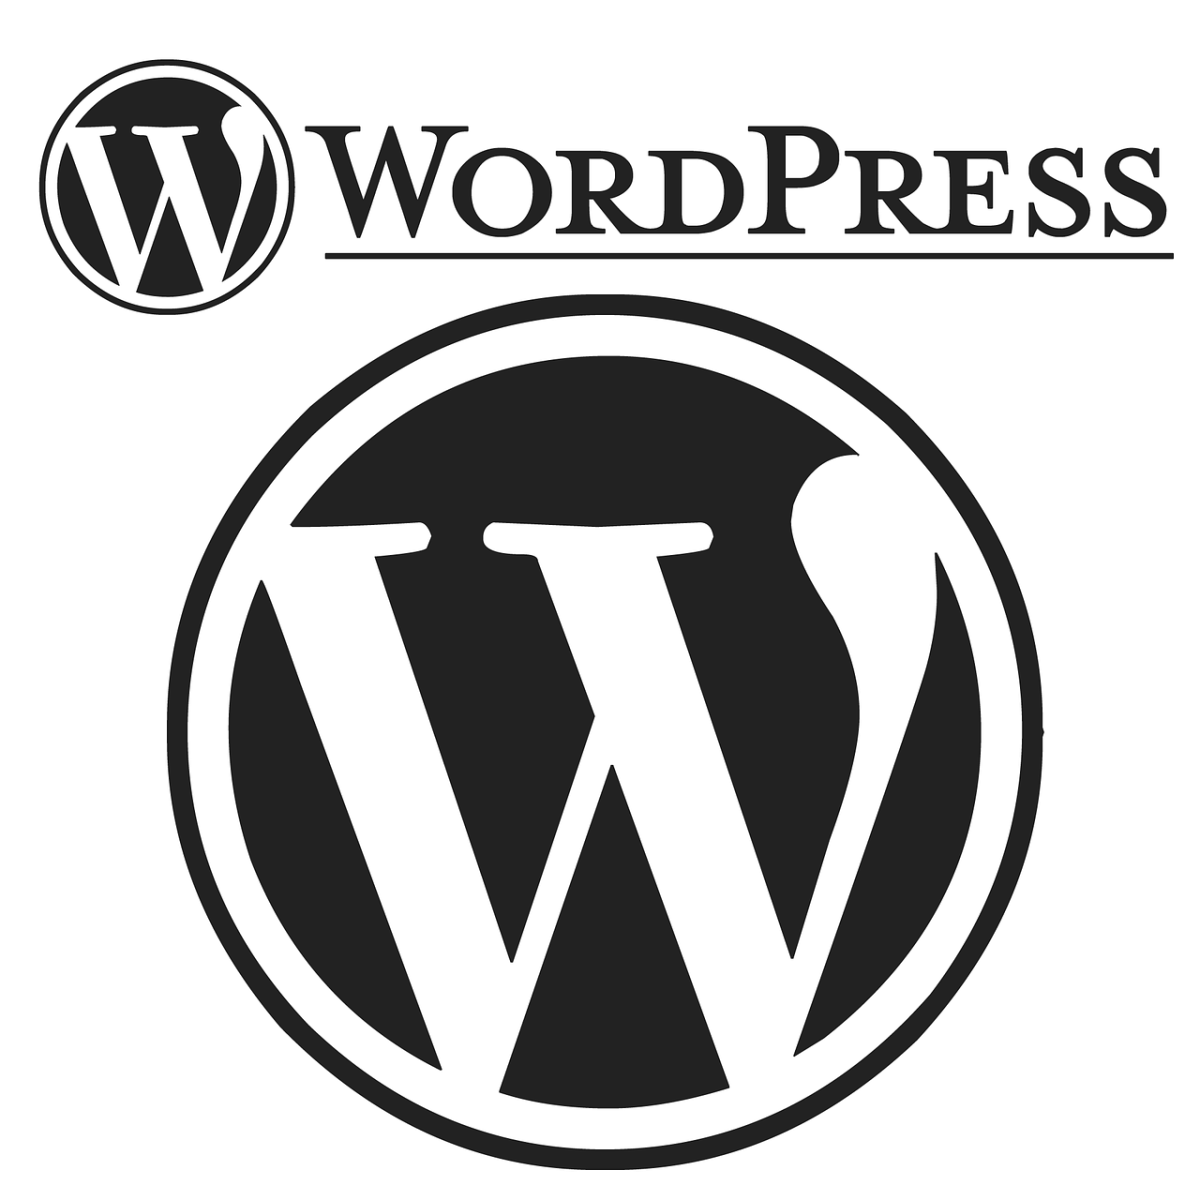 6 Important Reasons to Use WordPress for Your Blogging Platform